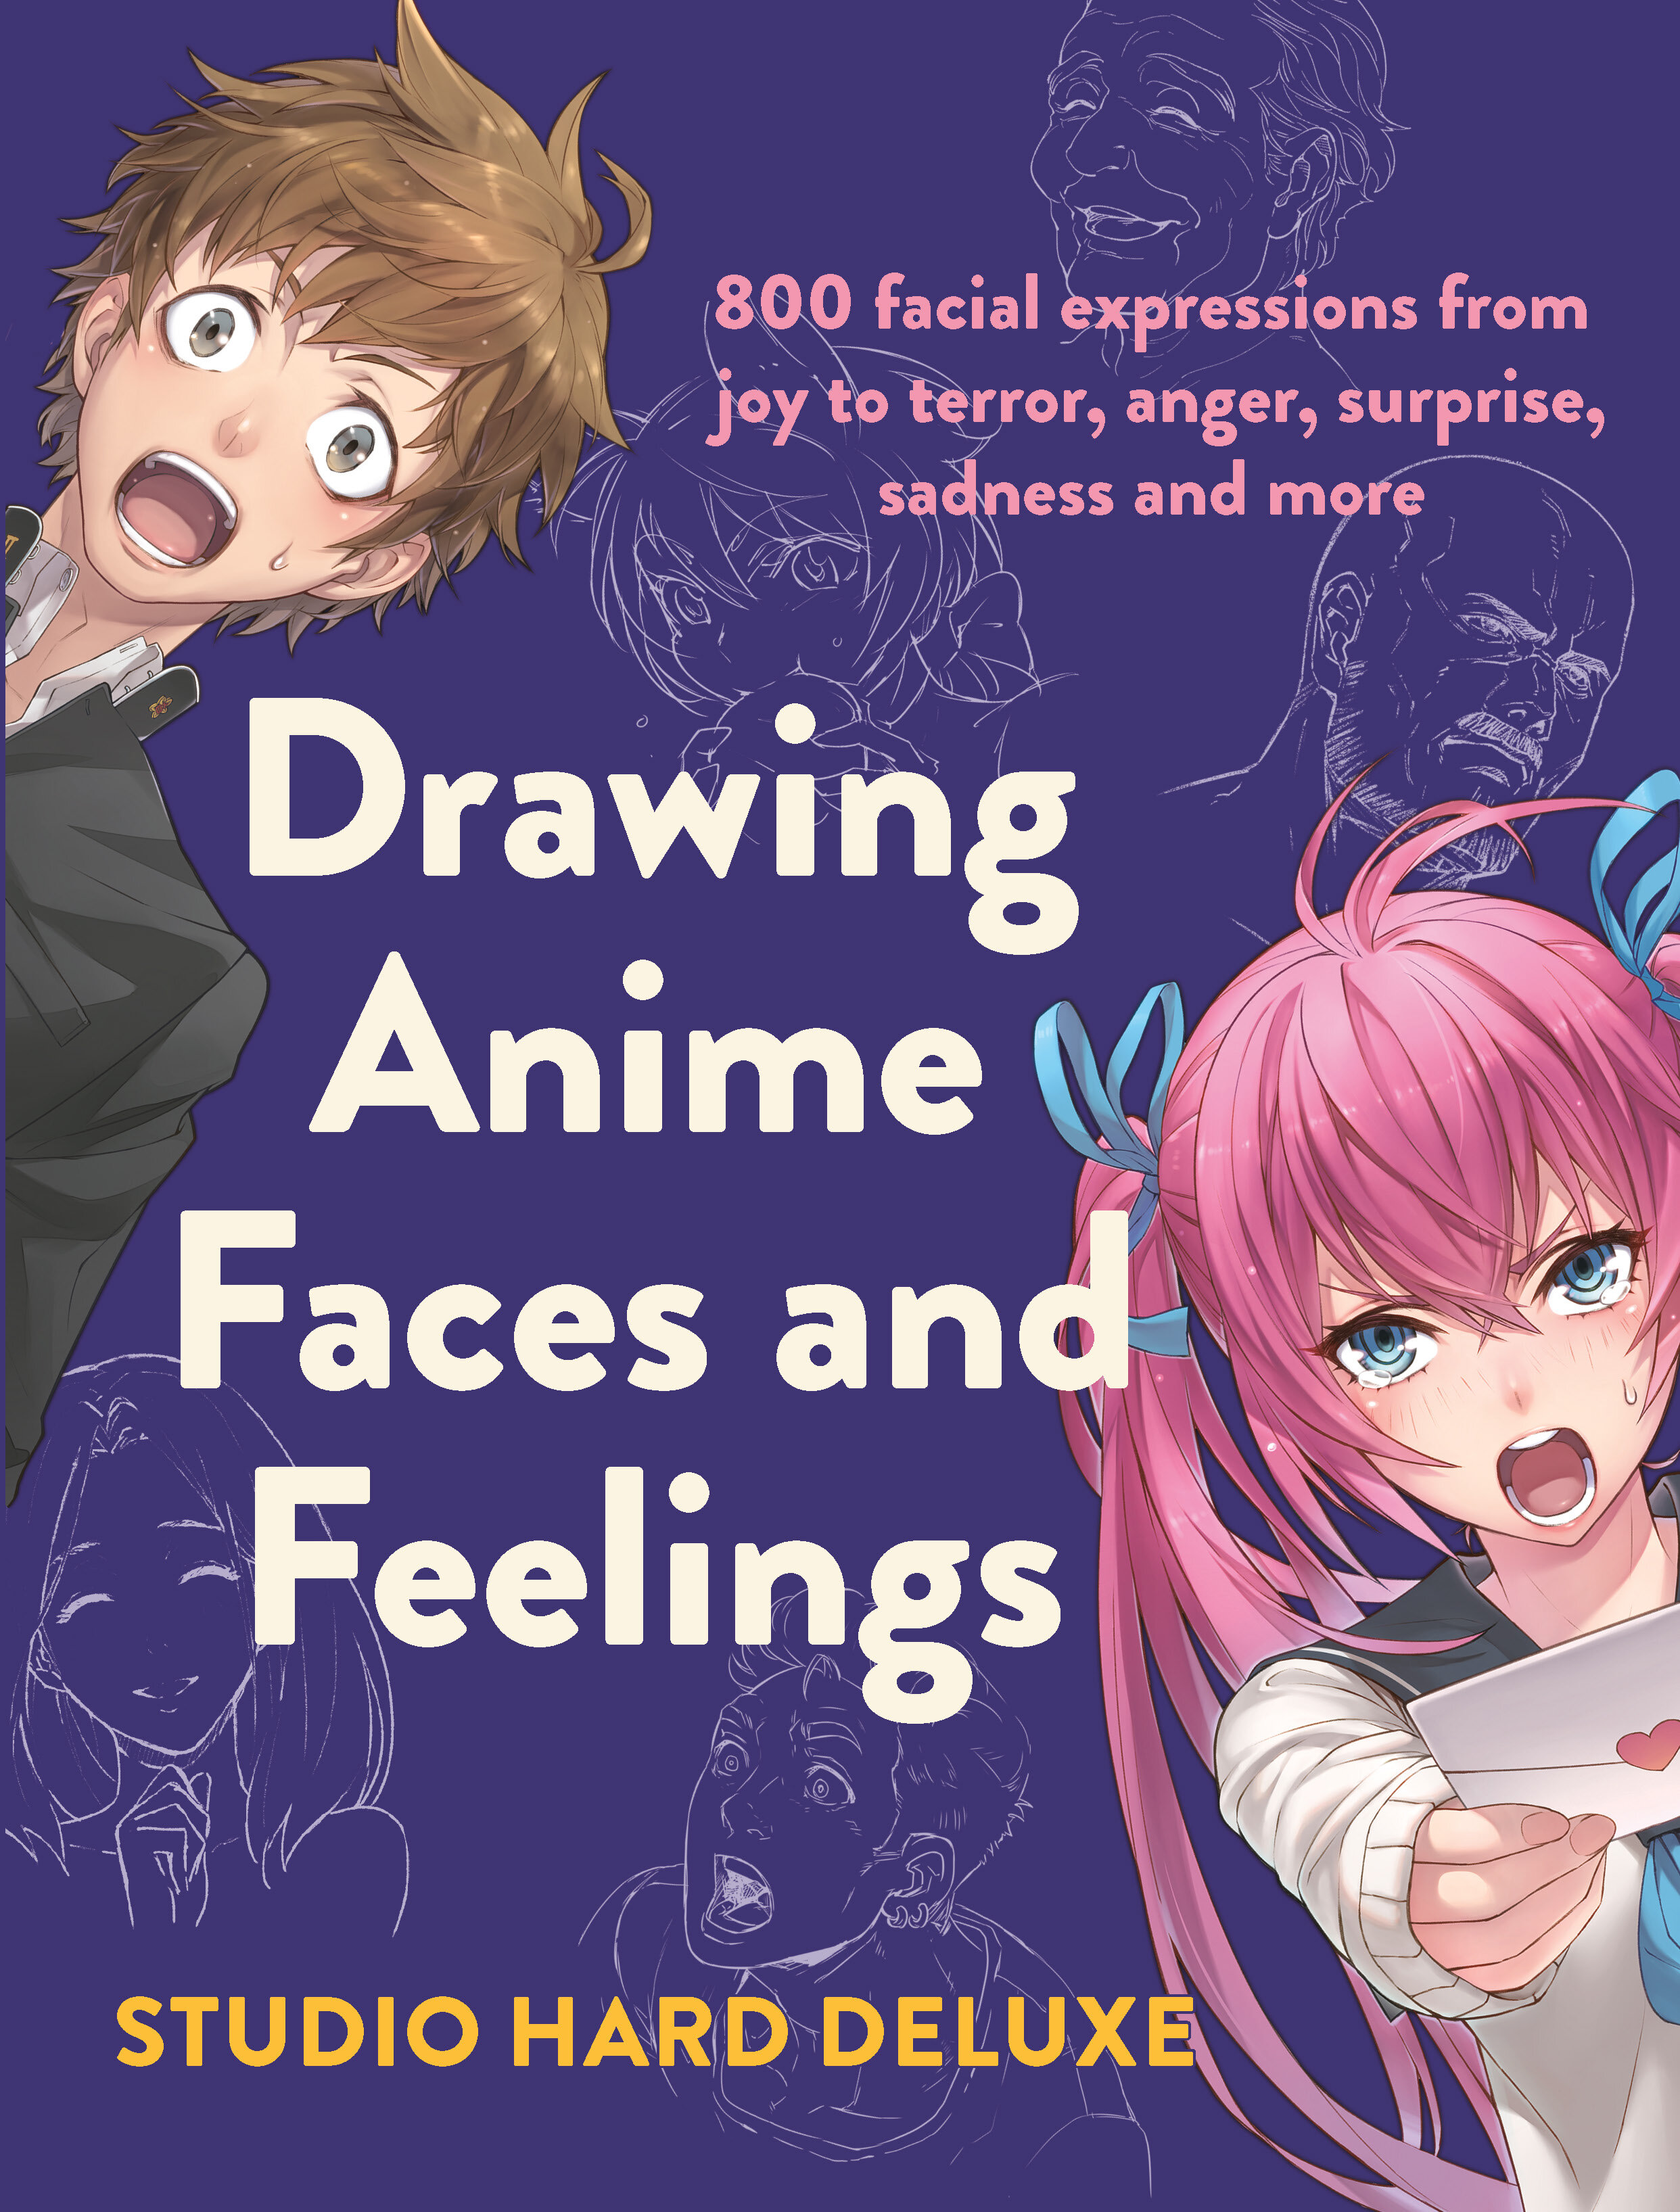 Anime Expressions Japanese Anime Various Expressions Status Art Posters  Canvas Painting Wall Art Poster for Bedroom Living Room Decor  12x16inch(30x40cm) Frame-Anime Expressions Japanese Anime Various :  Amazon.ca: Home